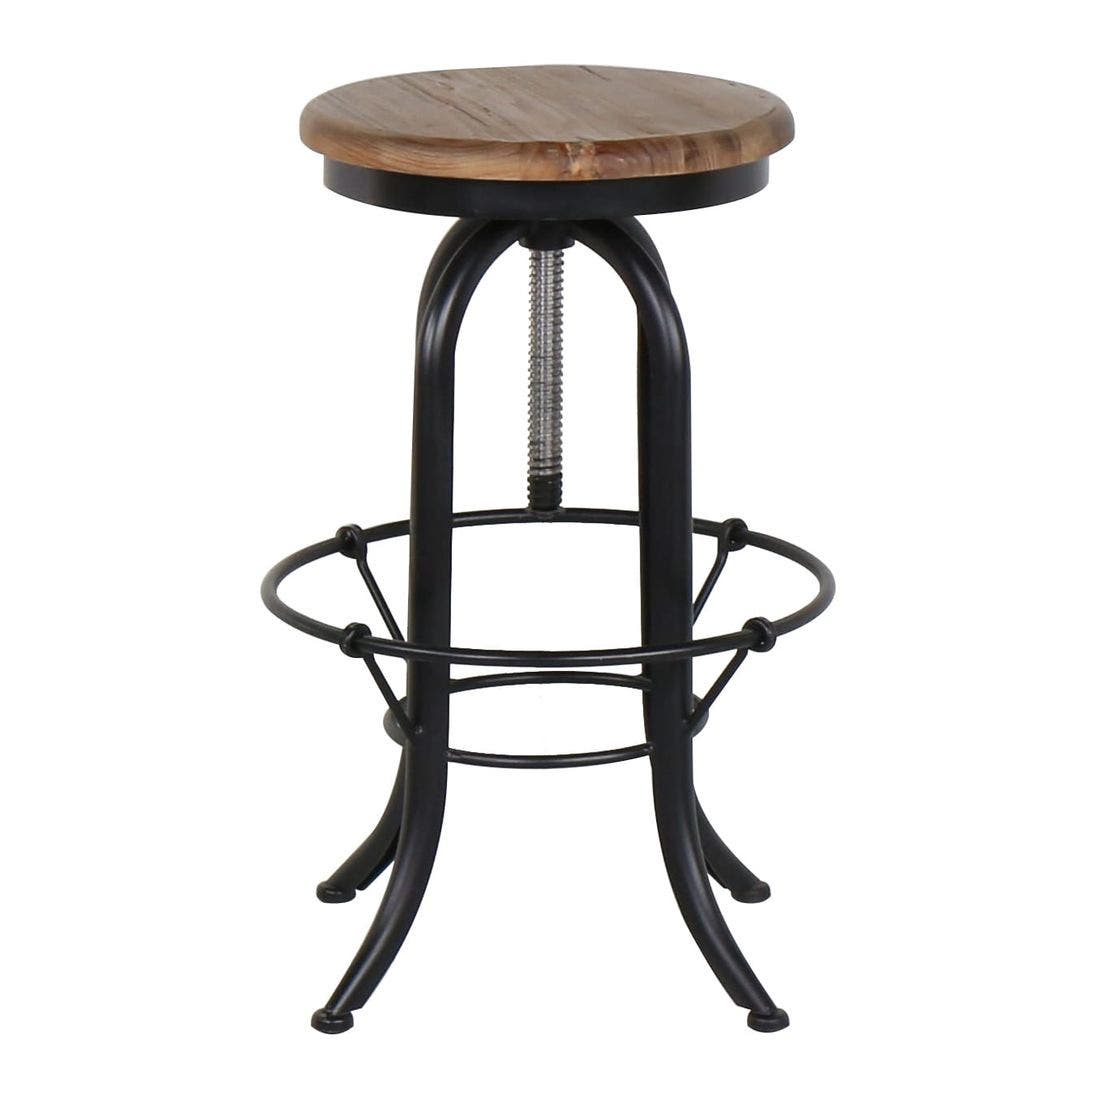 19117266-aiden-furniture-dining-room-bar-stools-counter-stools-01